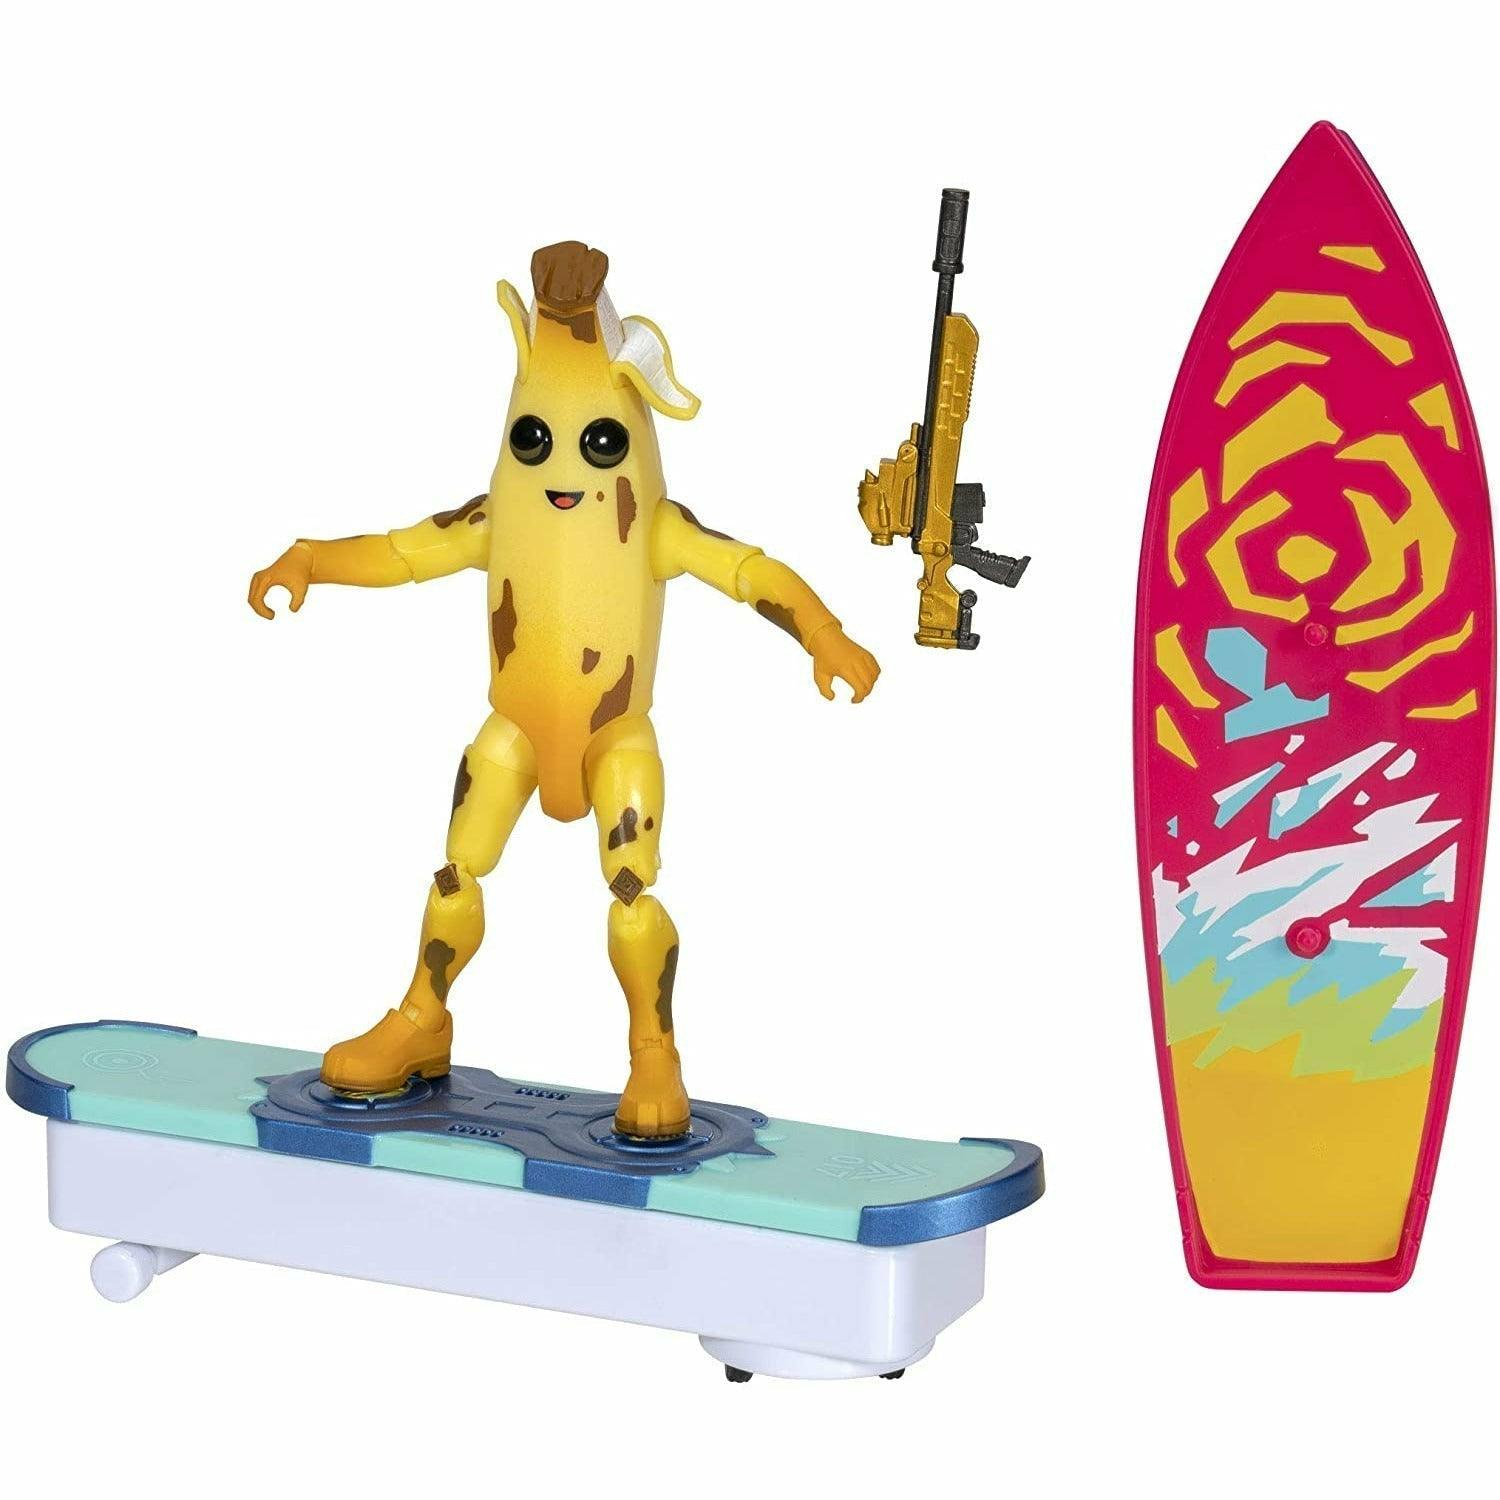 Fortnite Transforming Driftboard Vehicle - Interchangeable Surfboard and Driftboard Faceplates - BumbleToys - 8+ Years, 8-13 Years, Action Battling, Action Figures, Boys, Figures, Fortnite, OXE, Pre-Order